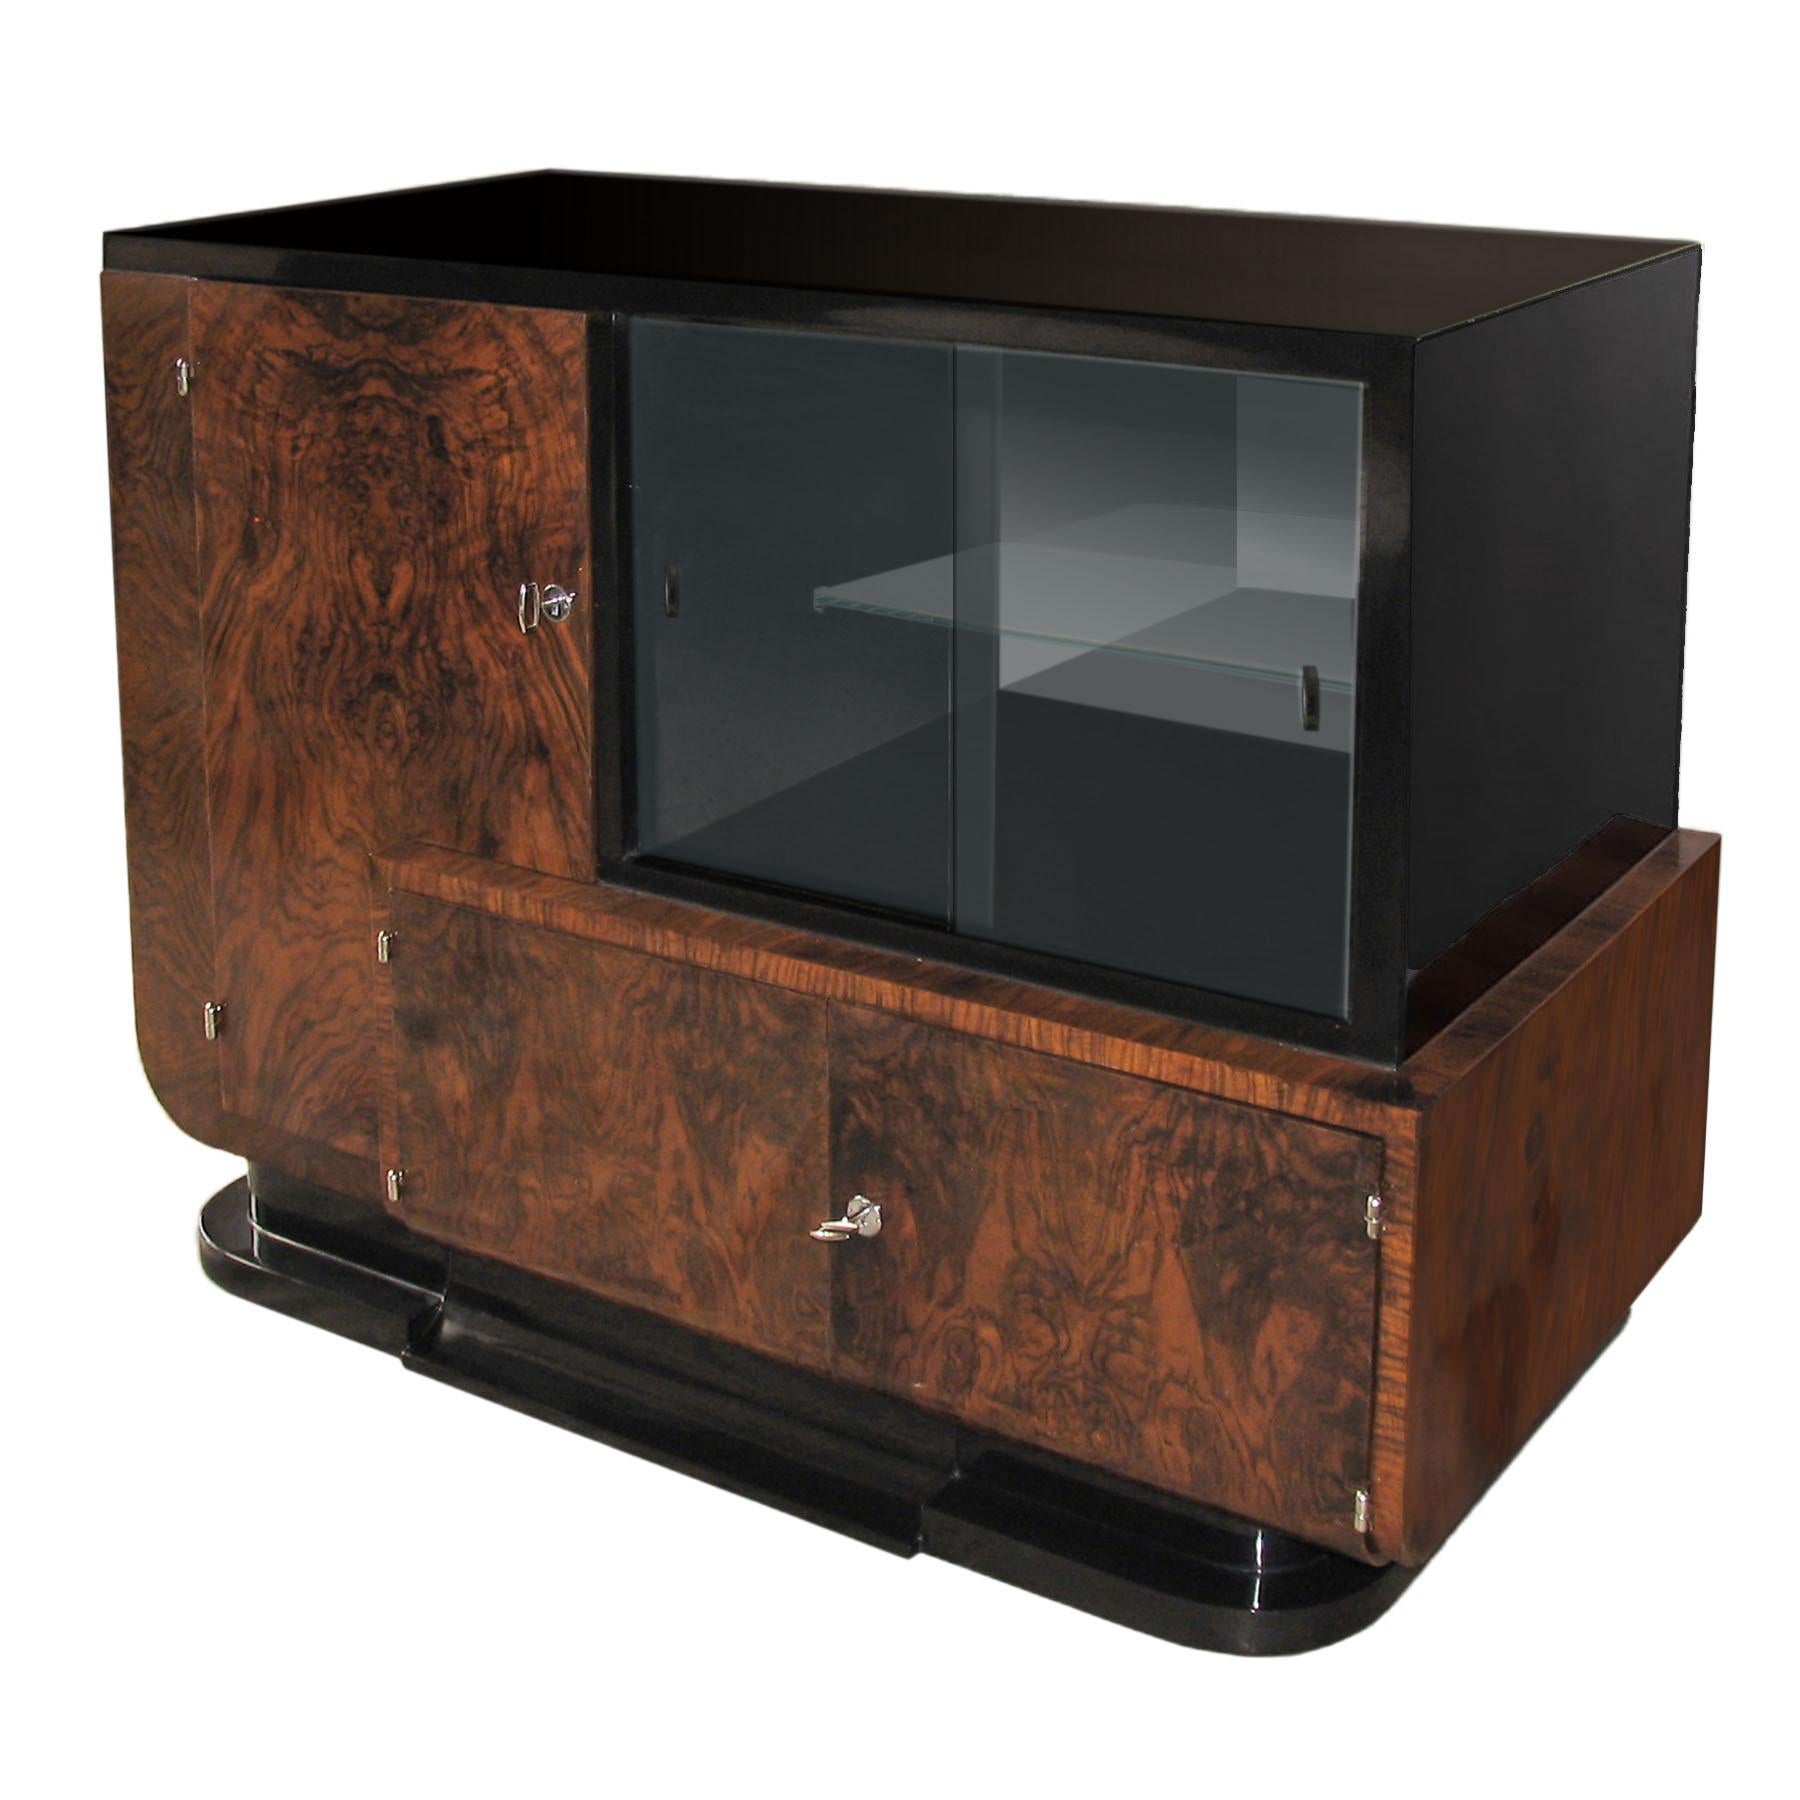 High Art Deco sideboard, dry bar, cabinet, walnut veneer, France circa 1930.
Greatly restored original Art Deco Sideboard, Buffet or Cabinet in asymmetric design, curved lyre left, intersected with a cubist lower volume, protruding from the well